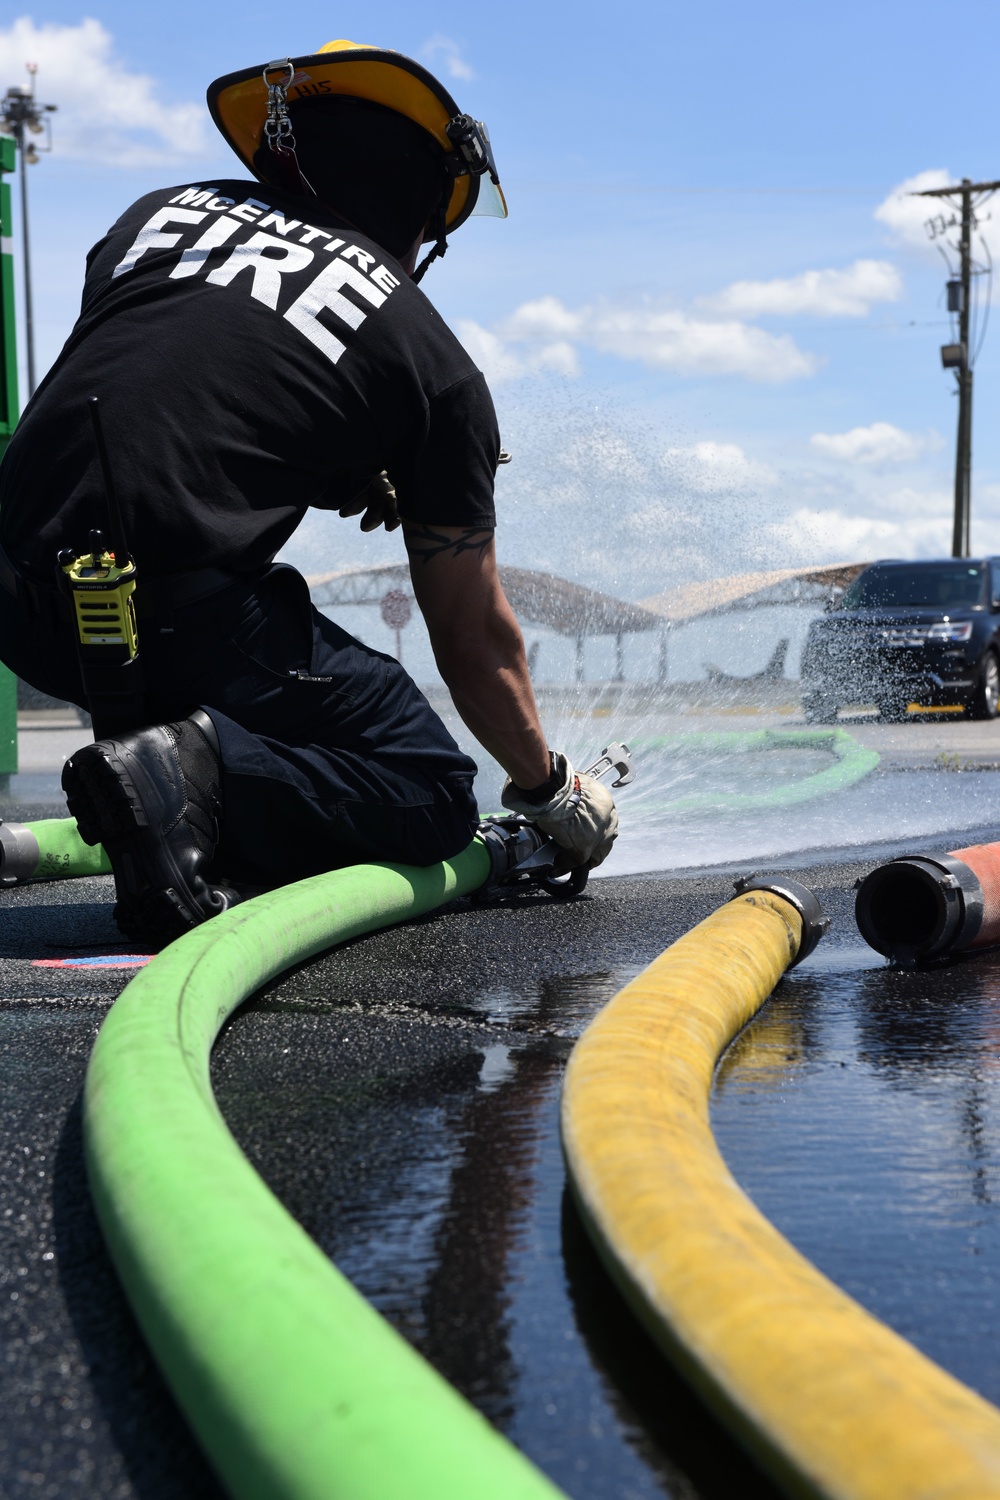 McEntire JNGB firefighters pressure test fire hoses